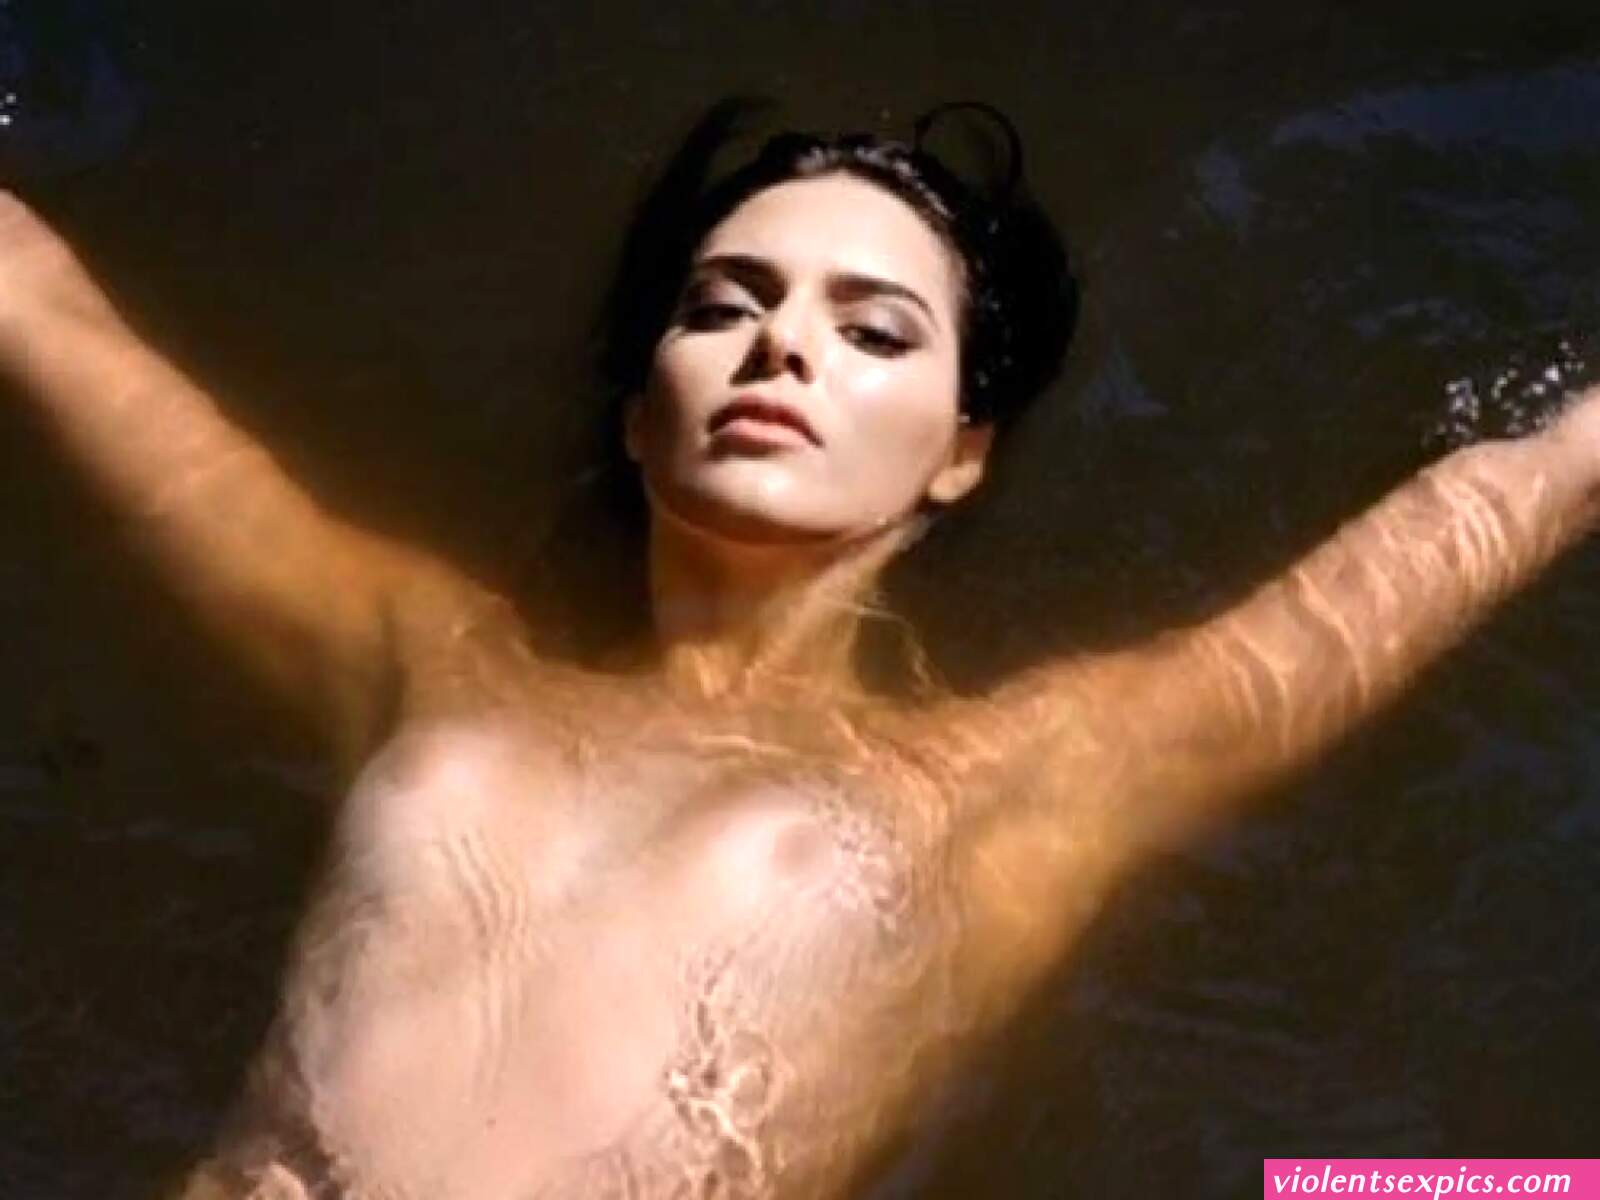 Kendall Jenner poses topless in revealing LOVE Magazine photoshoot